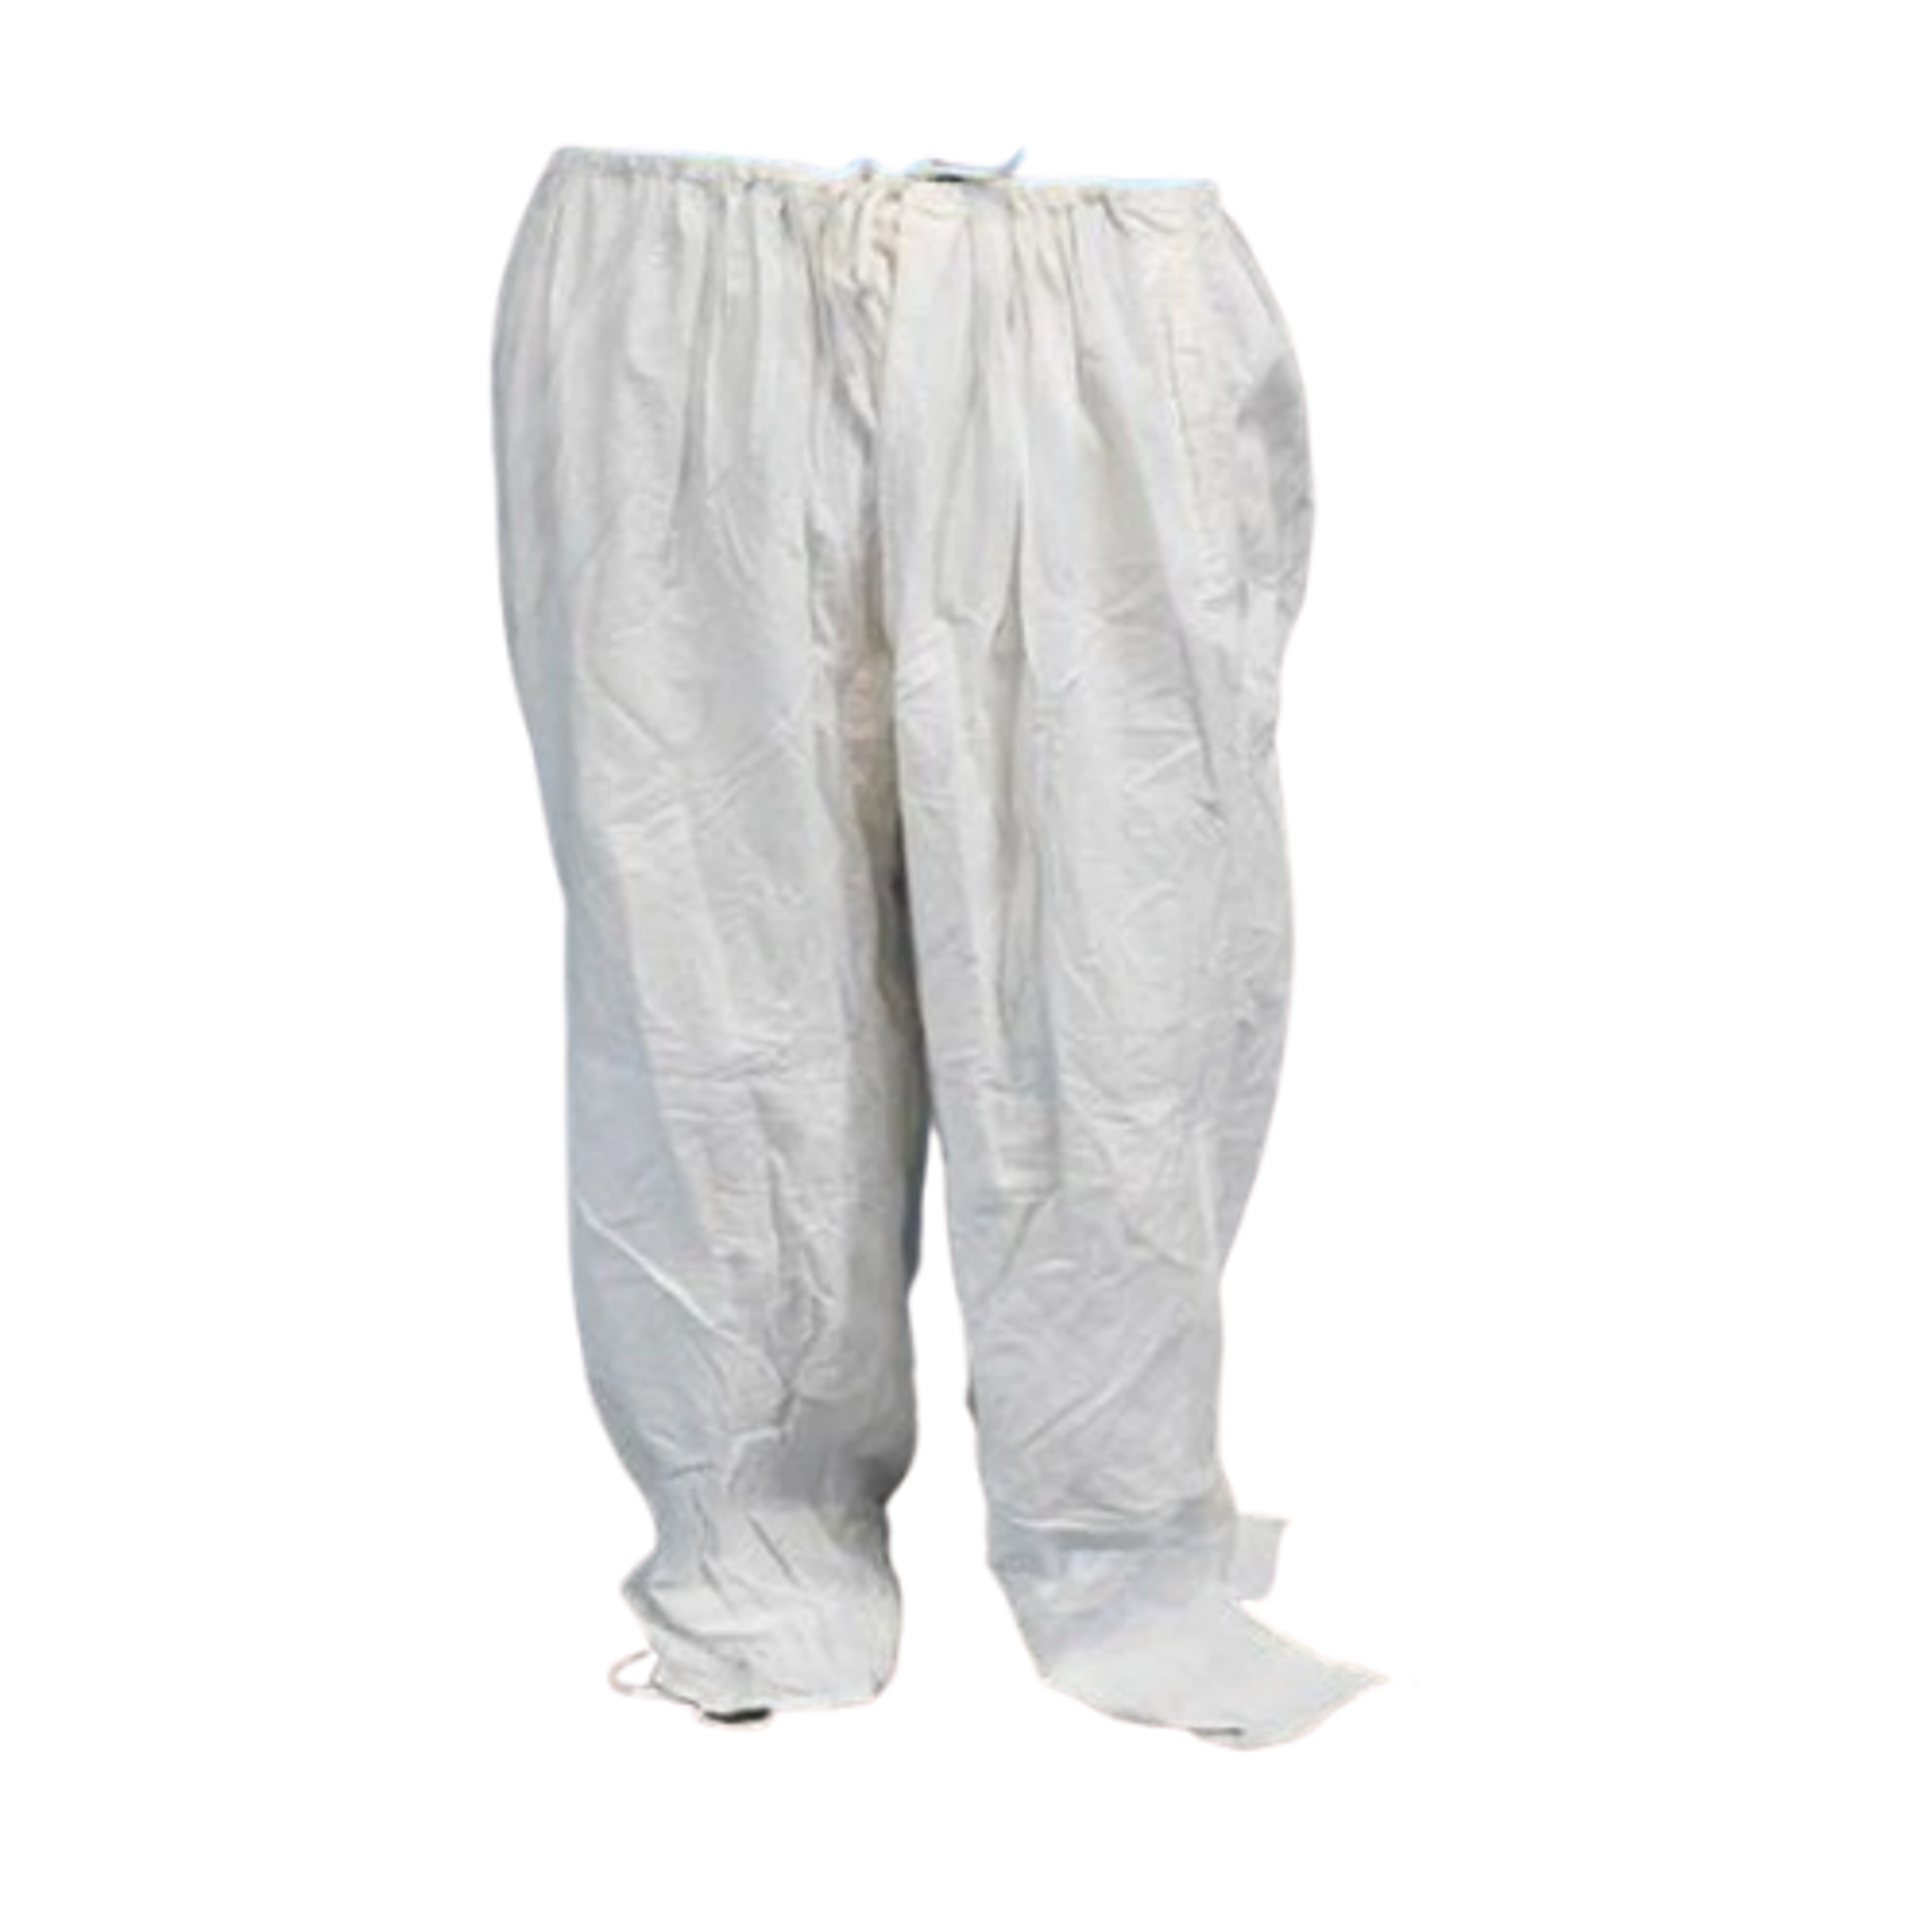 Czech Armed Forces White Snow Pants